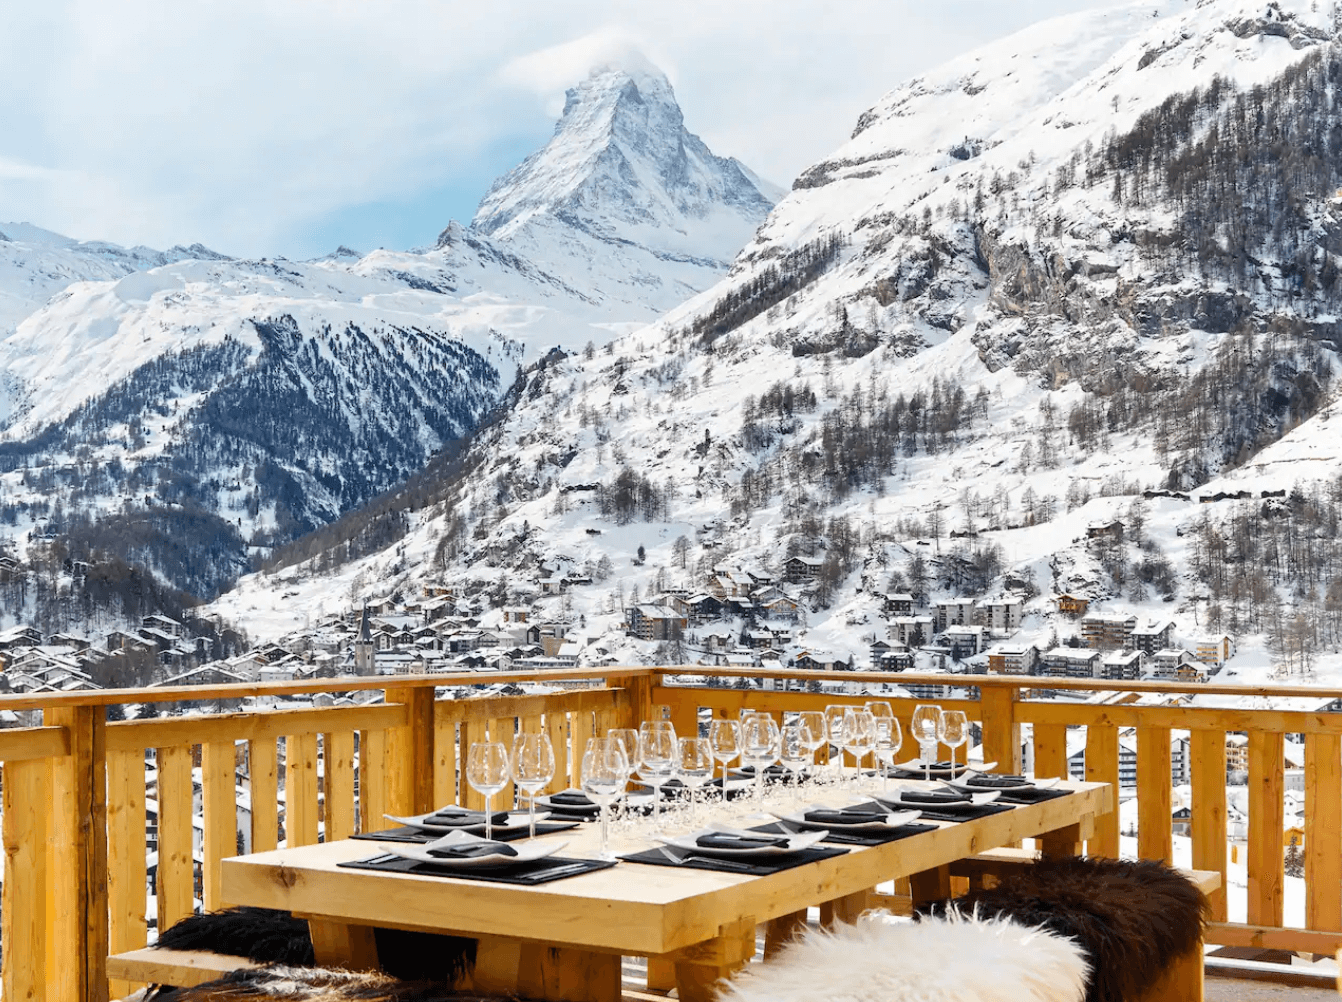 Chalet Les Enges with a spectacular view of the Matterhorn